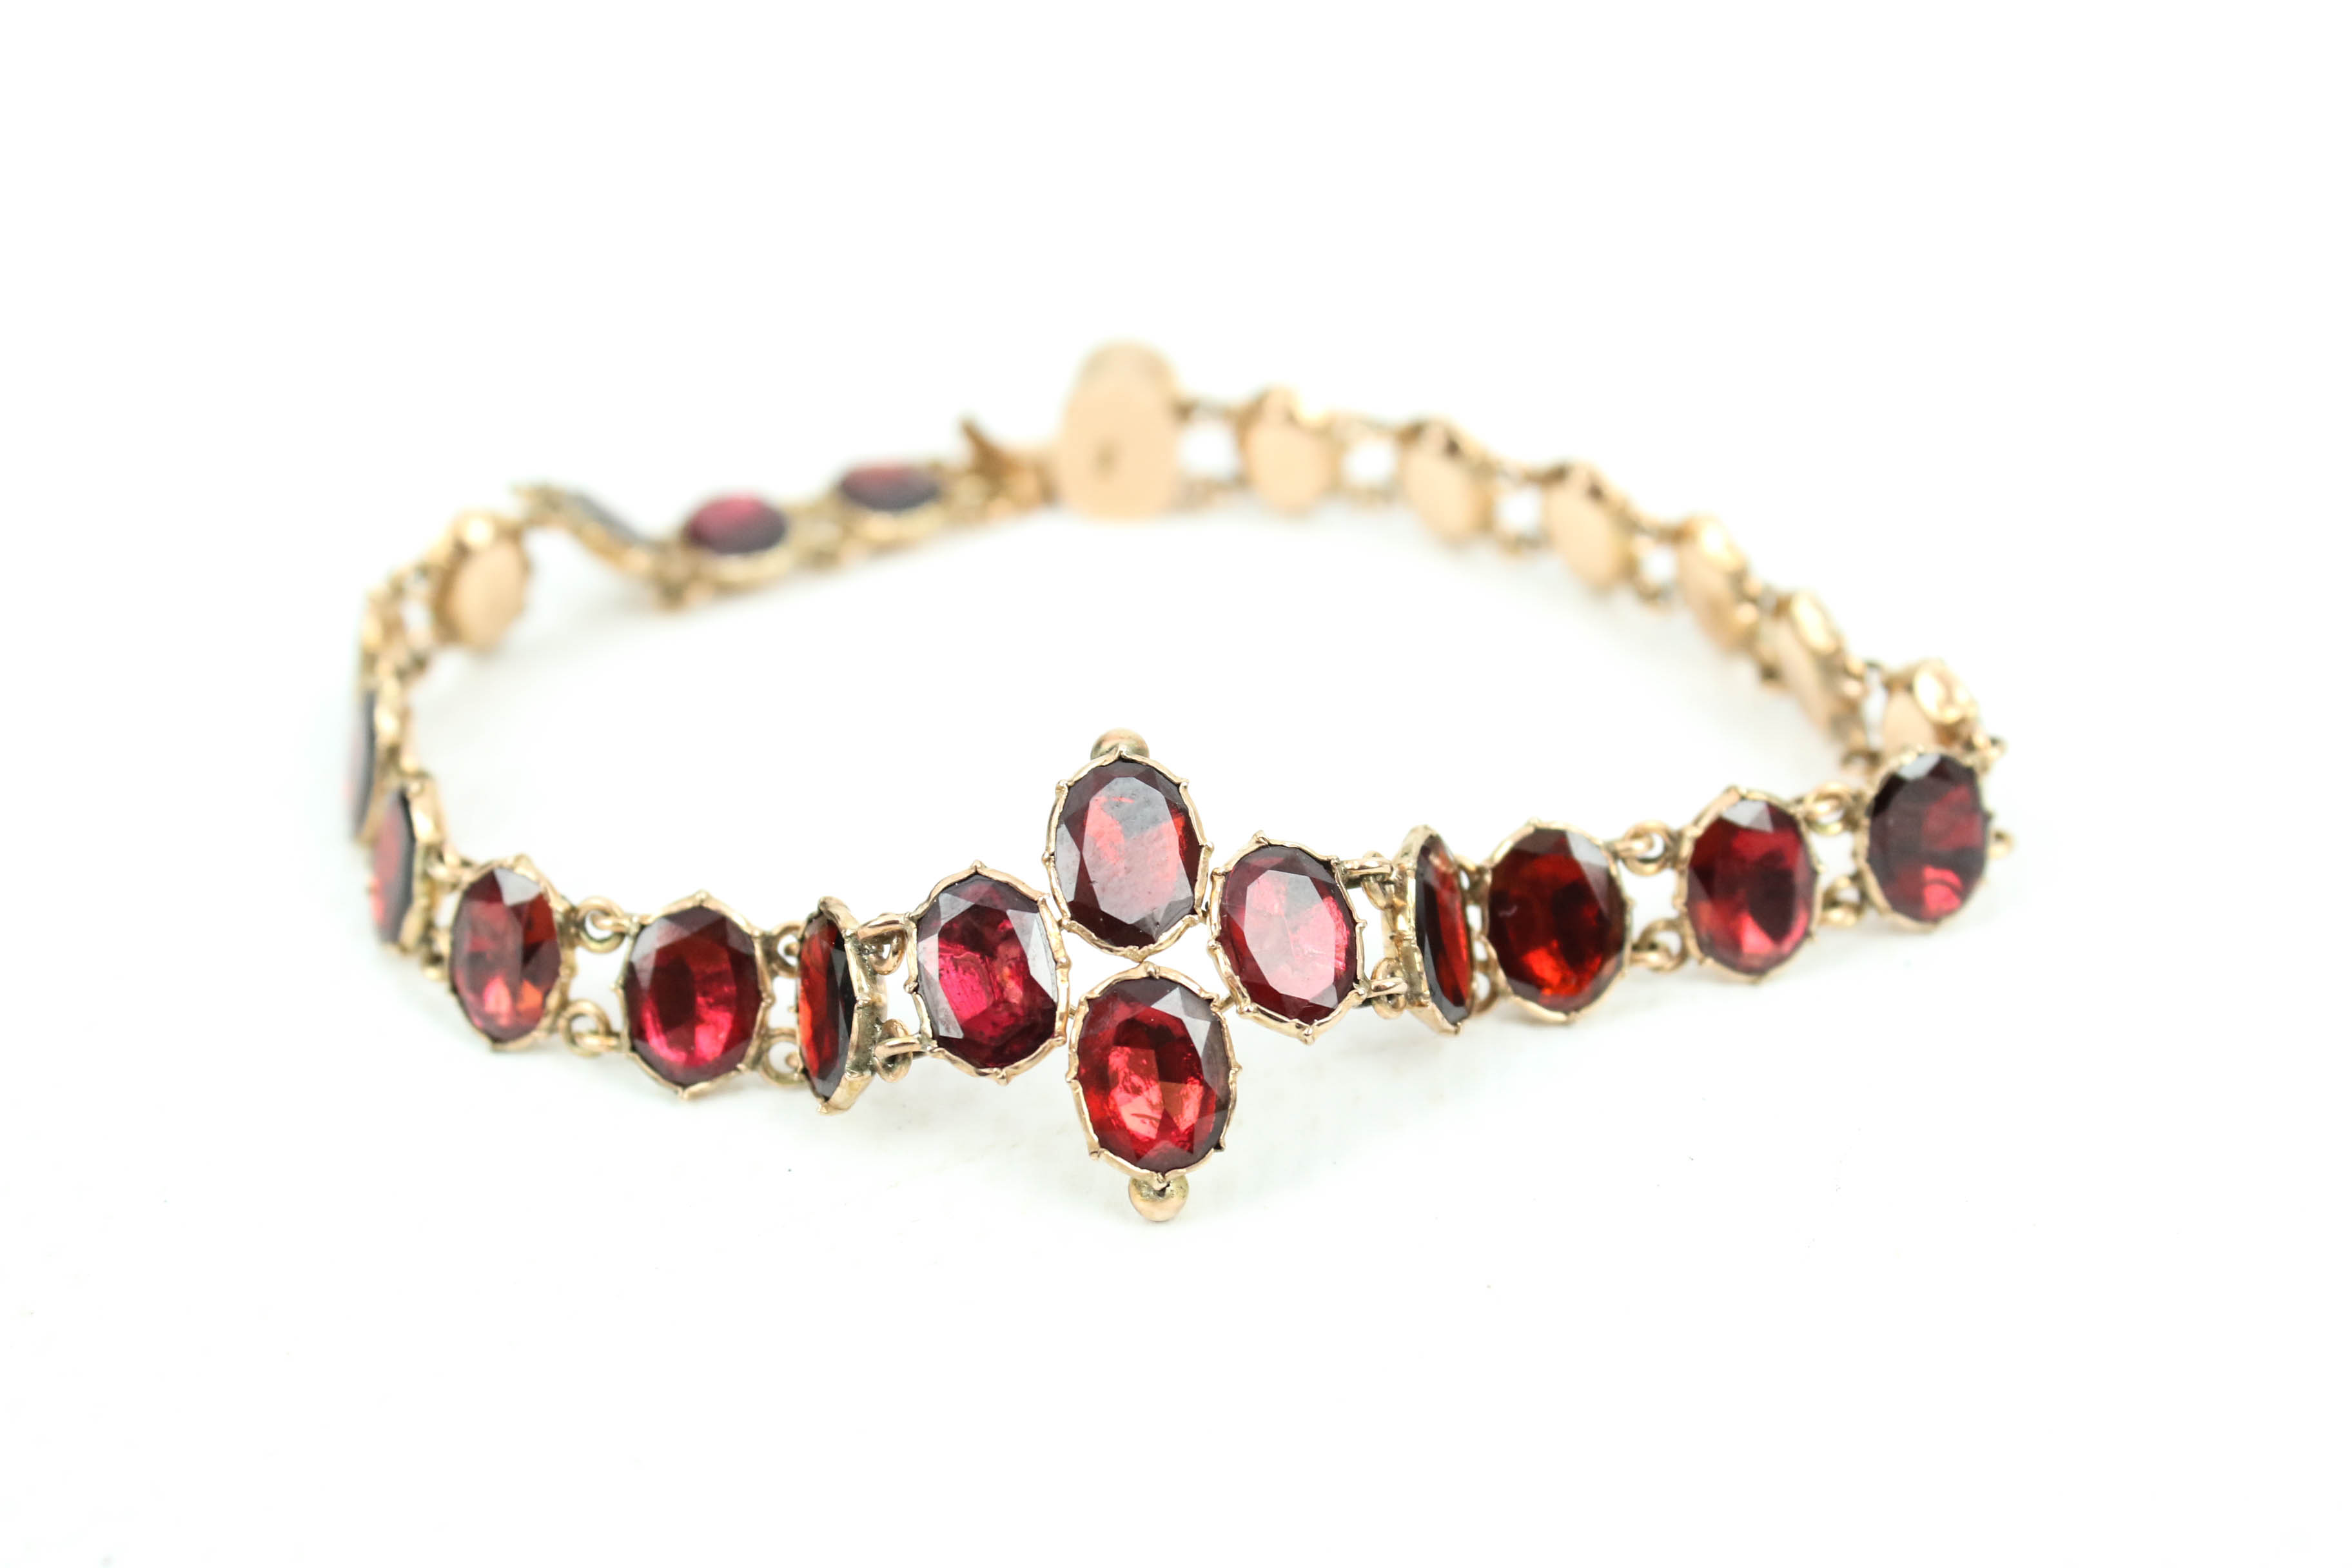 A Victorian rose gold and garnet bracelet in the 18th century style. - Image 5 of 5